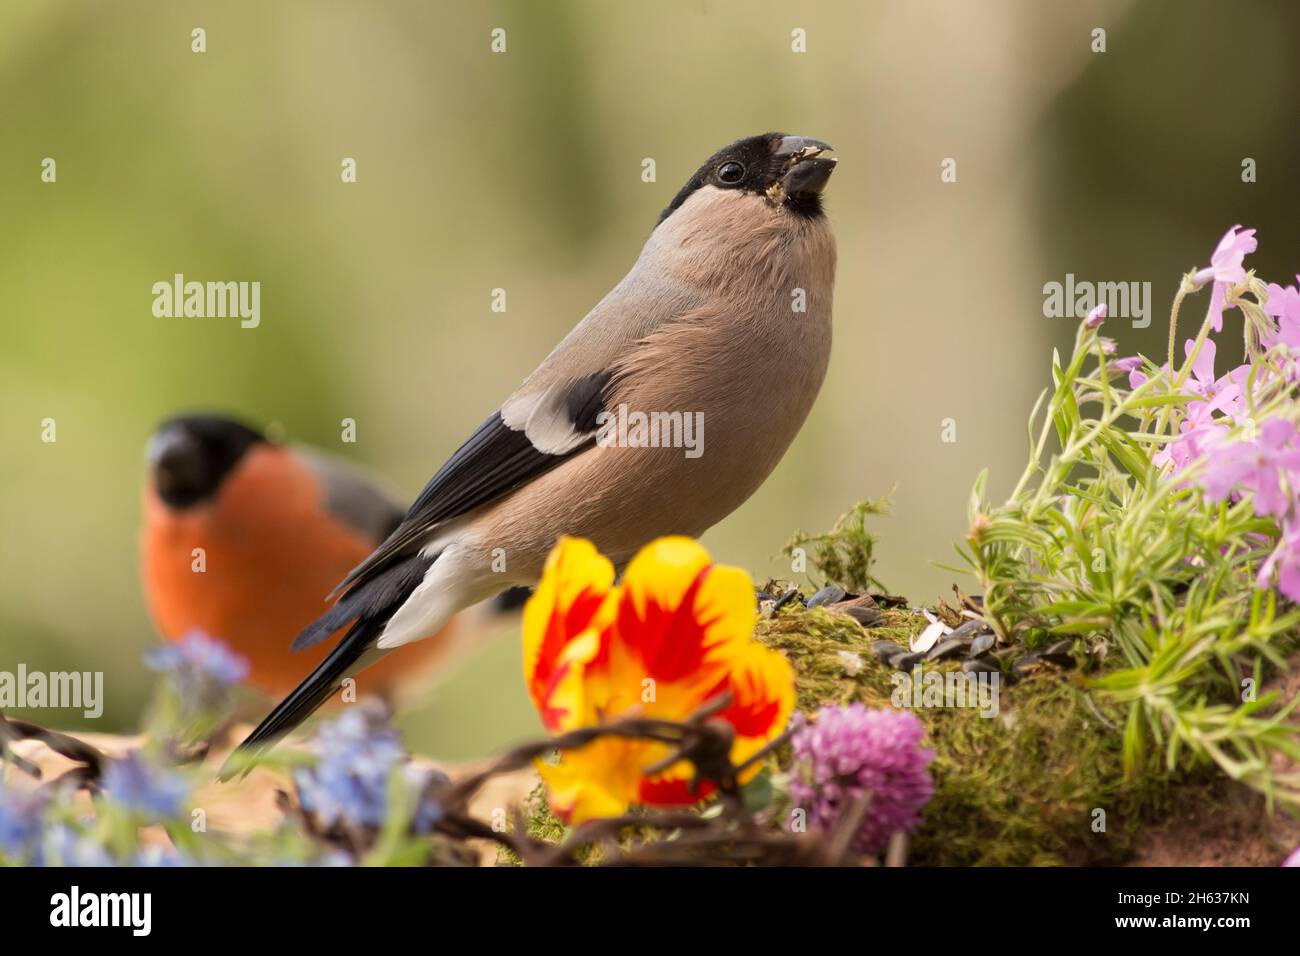 close up of female bullfinch standing with barbed wire,moss and flowers Stock Photo